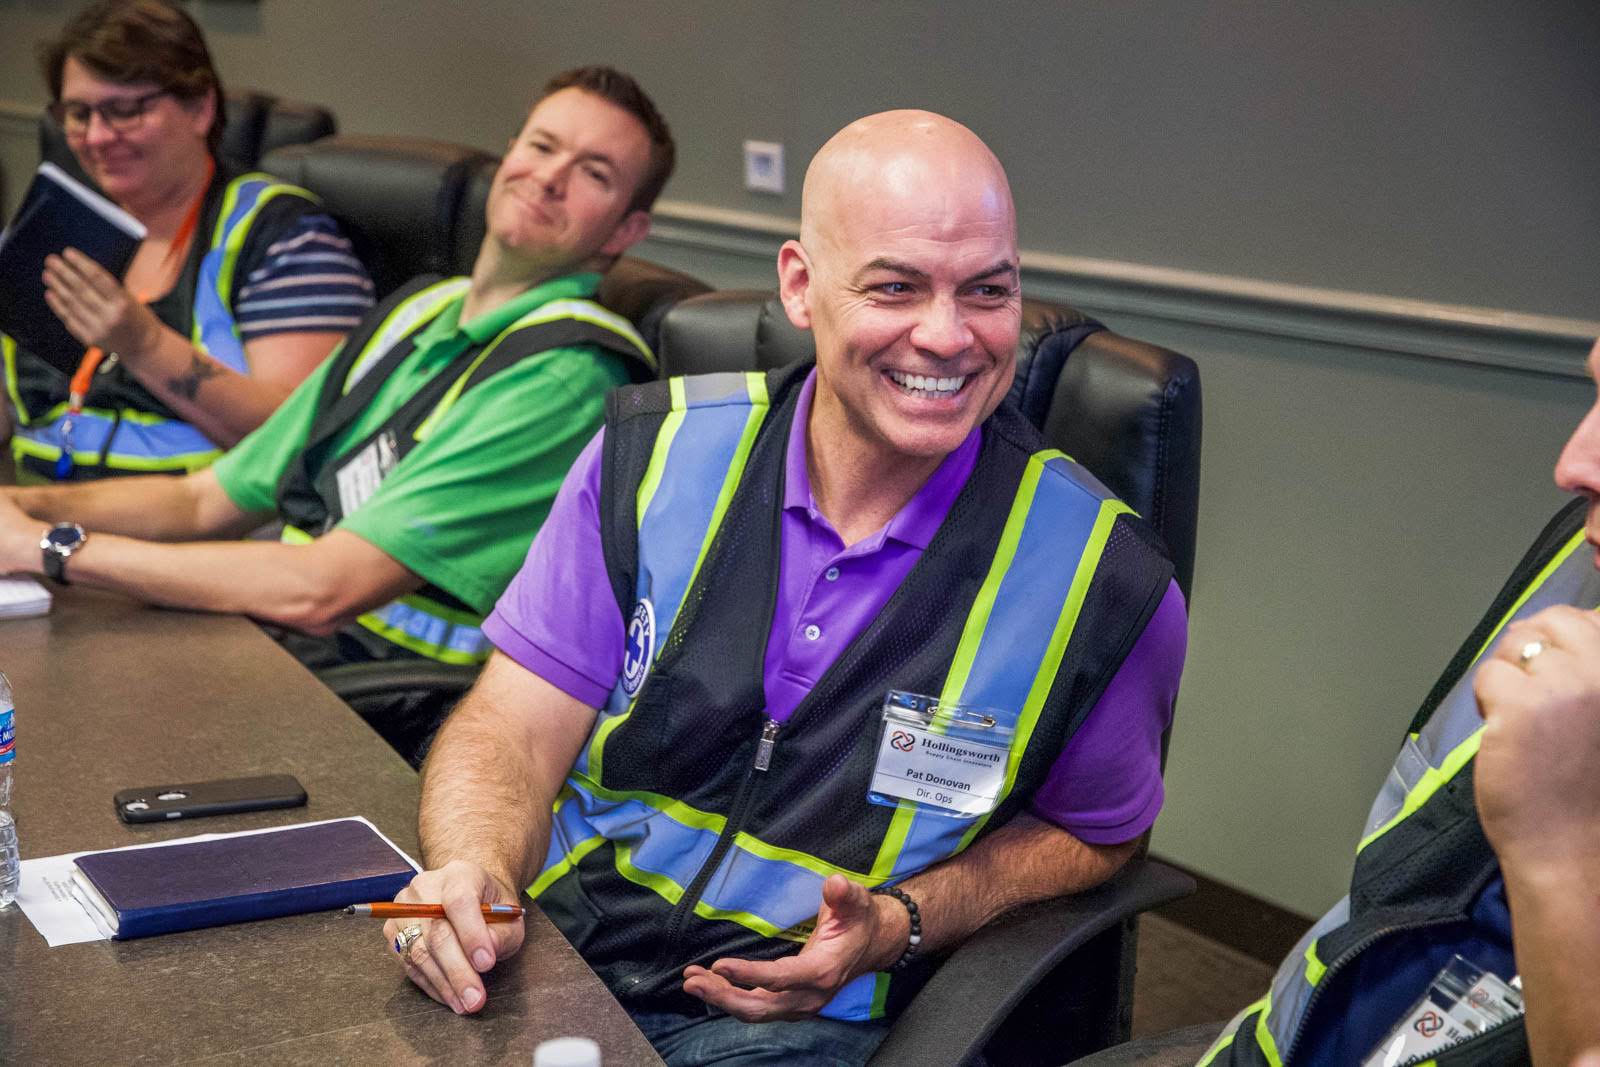 Smiling employees sit at a conference table together